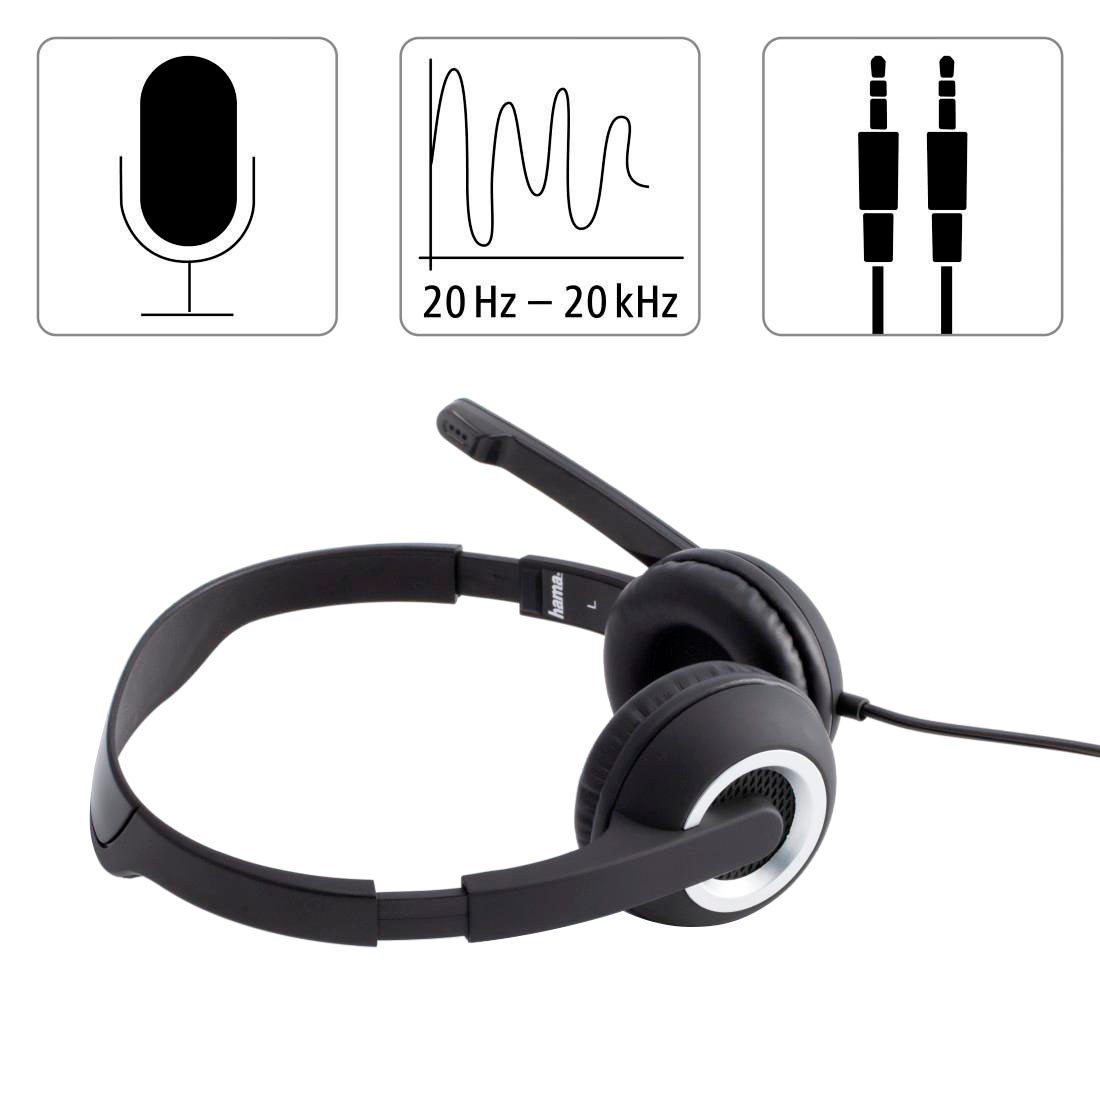 Hama PC-Headset 300" Stereo Headset HS "Essential